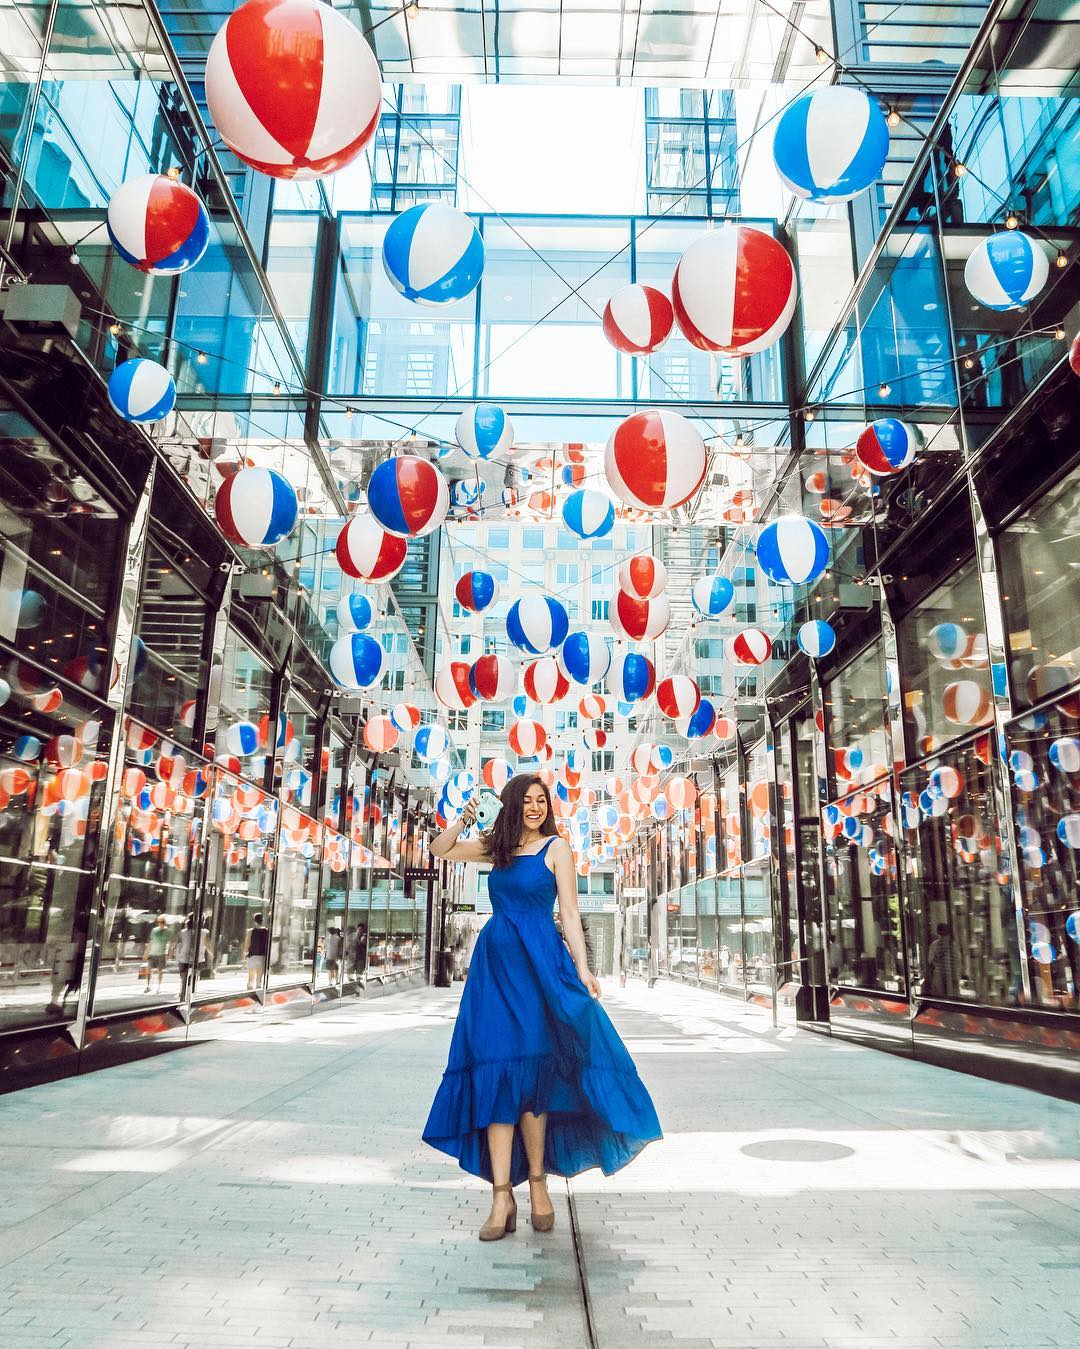 The Most Instagrammable Photo Spots In Washington Dc The Emily Edition